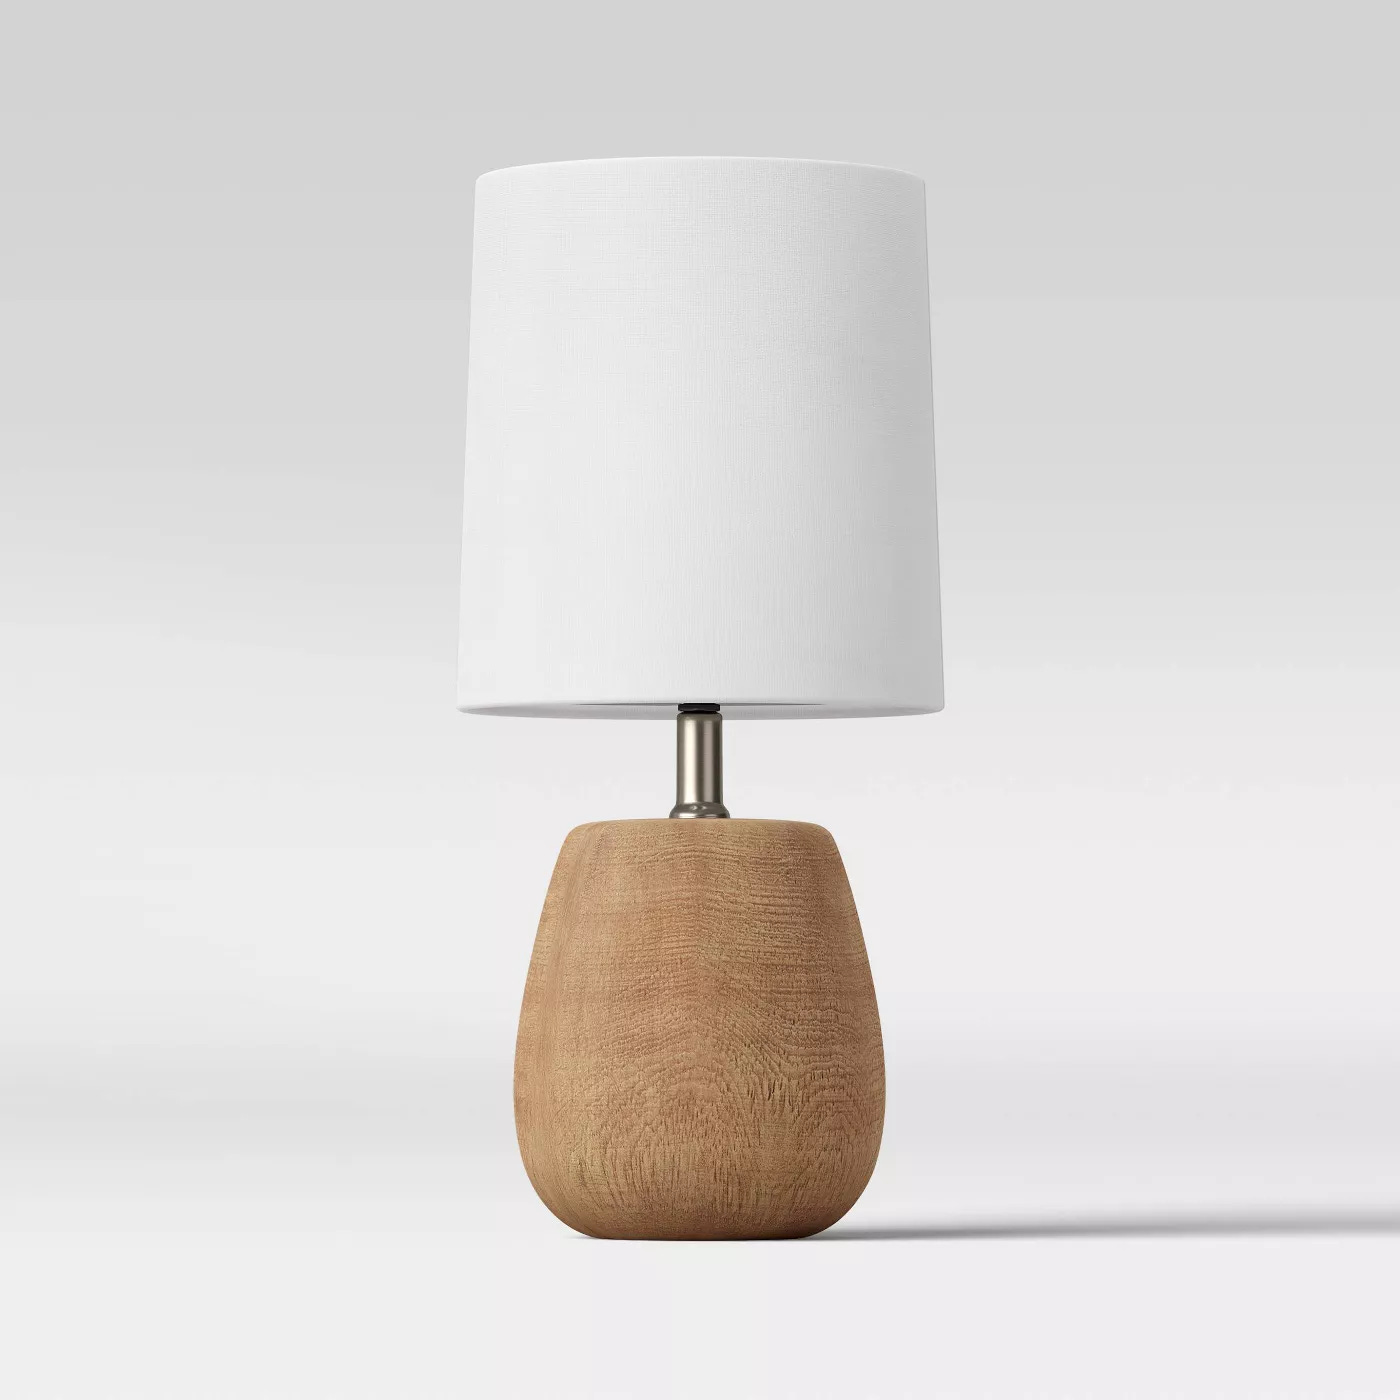 Polyresin Wood Accent Lamp - Threshold™ - image 1 of 10